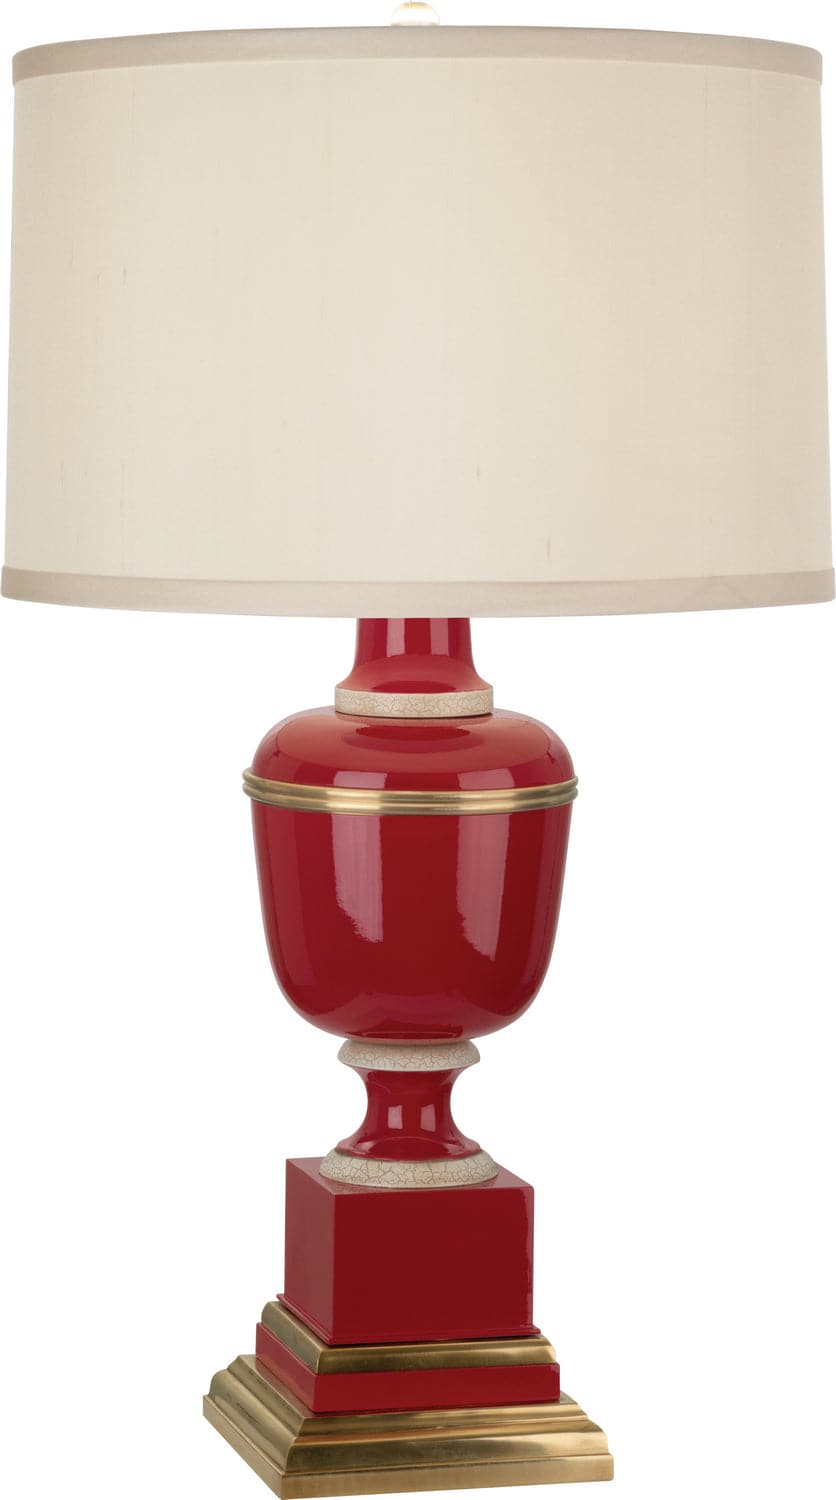 Robert Abbey - 2505X - One Light Accent Lamp - Annika - Red Lacquered Paint w/Natural Brass and Ivory Crackle